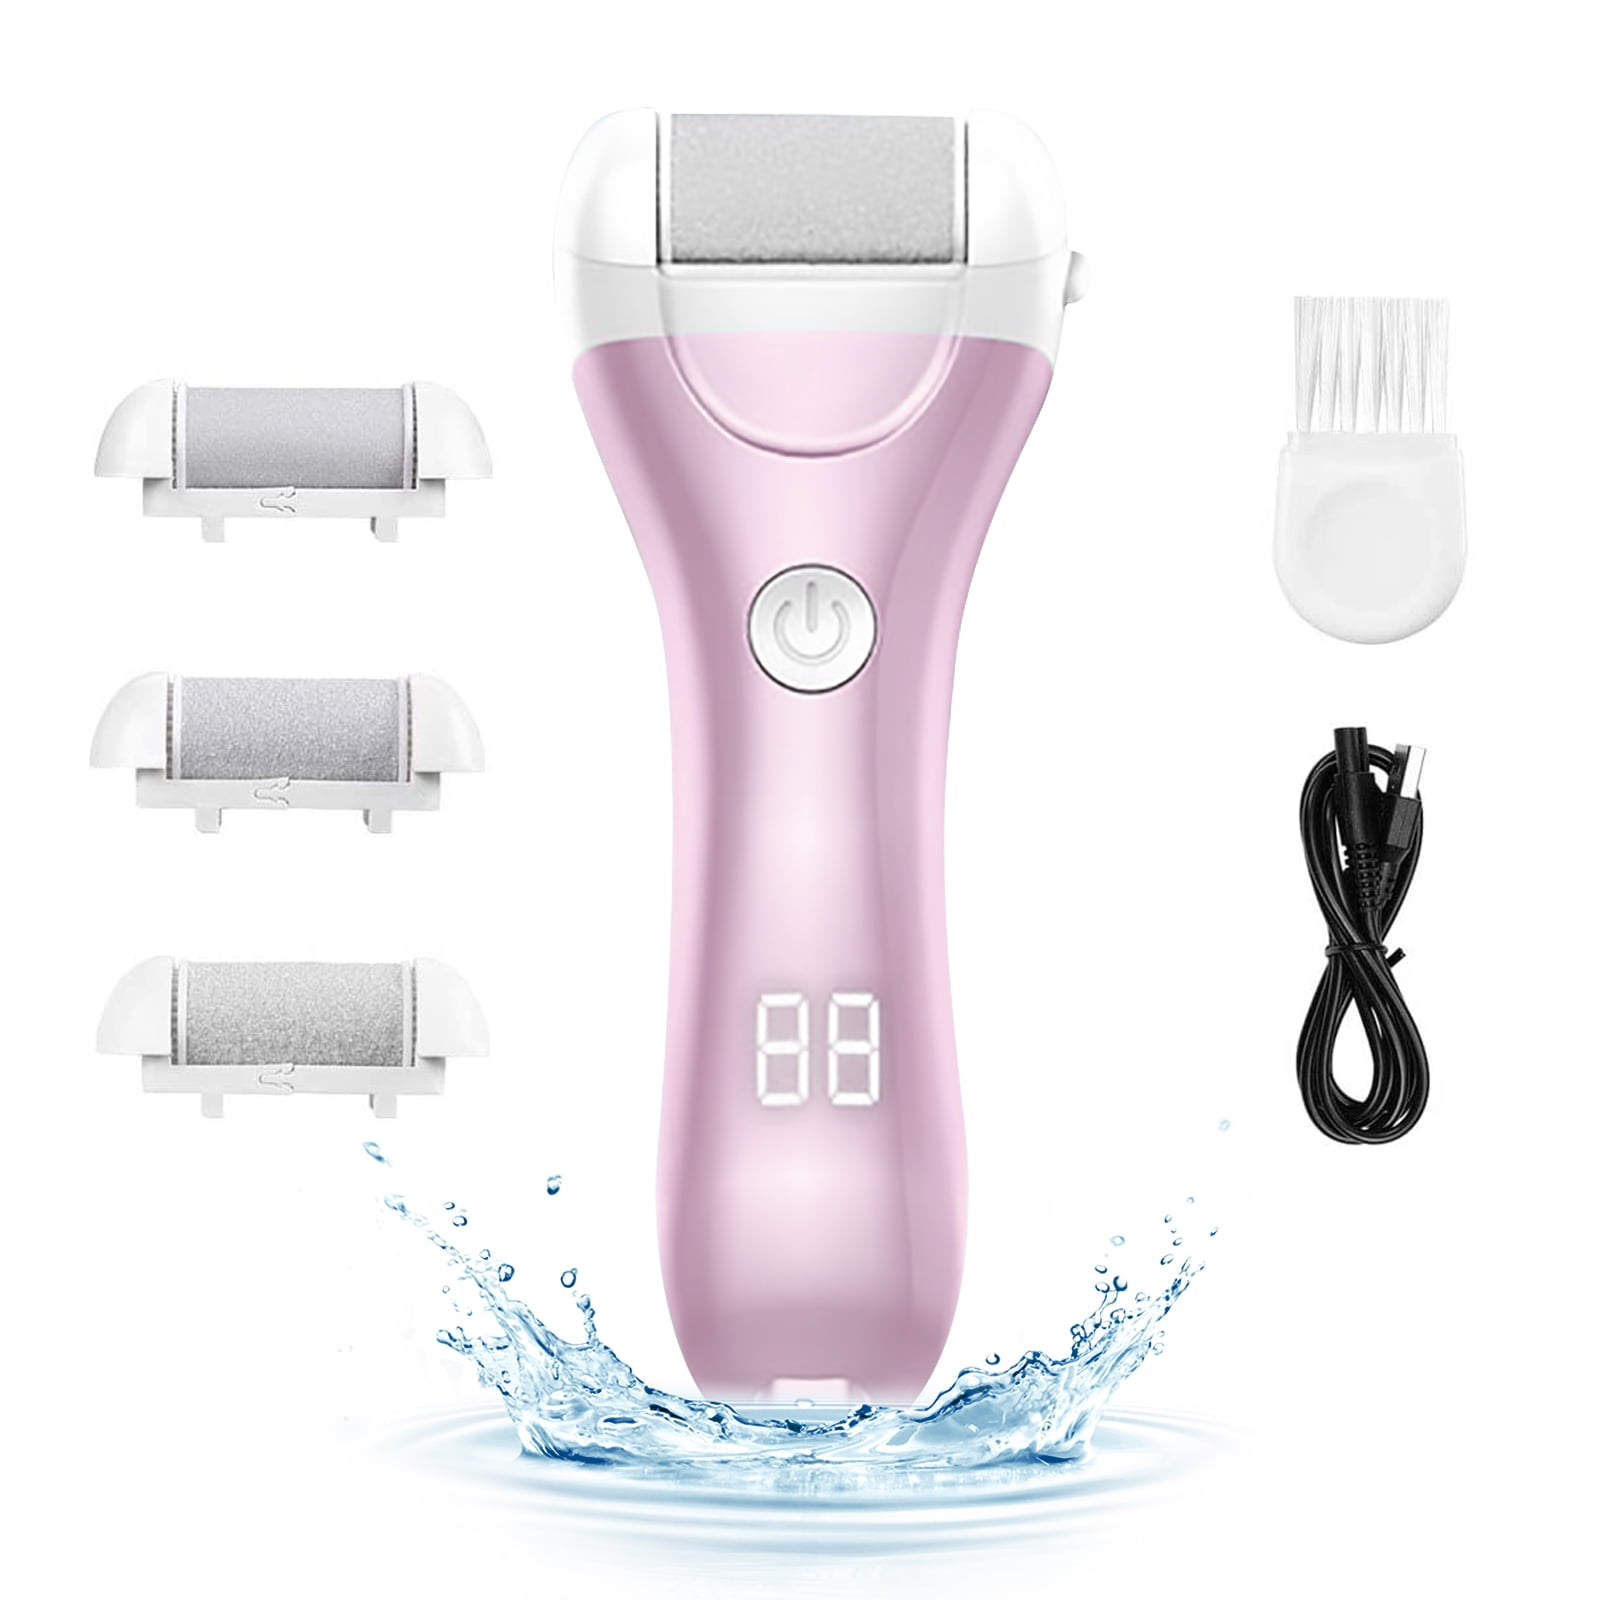 Nuve Smooth Pedicure Wand, Electric Foot Callus Remover, Portable Foot  Callus Remover, Foot Pedicure Tool, Callus Razor for Dry Cracked Heels